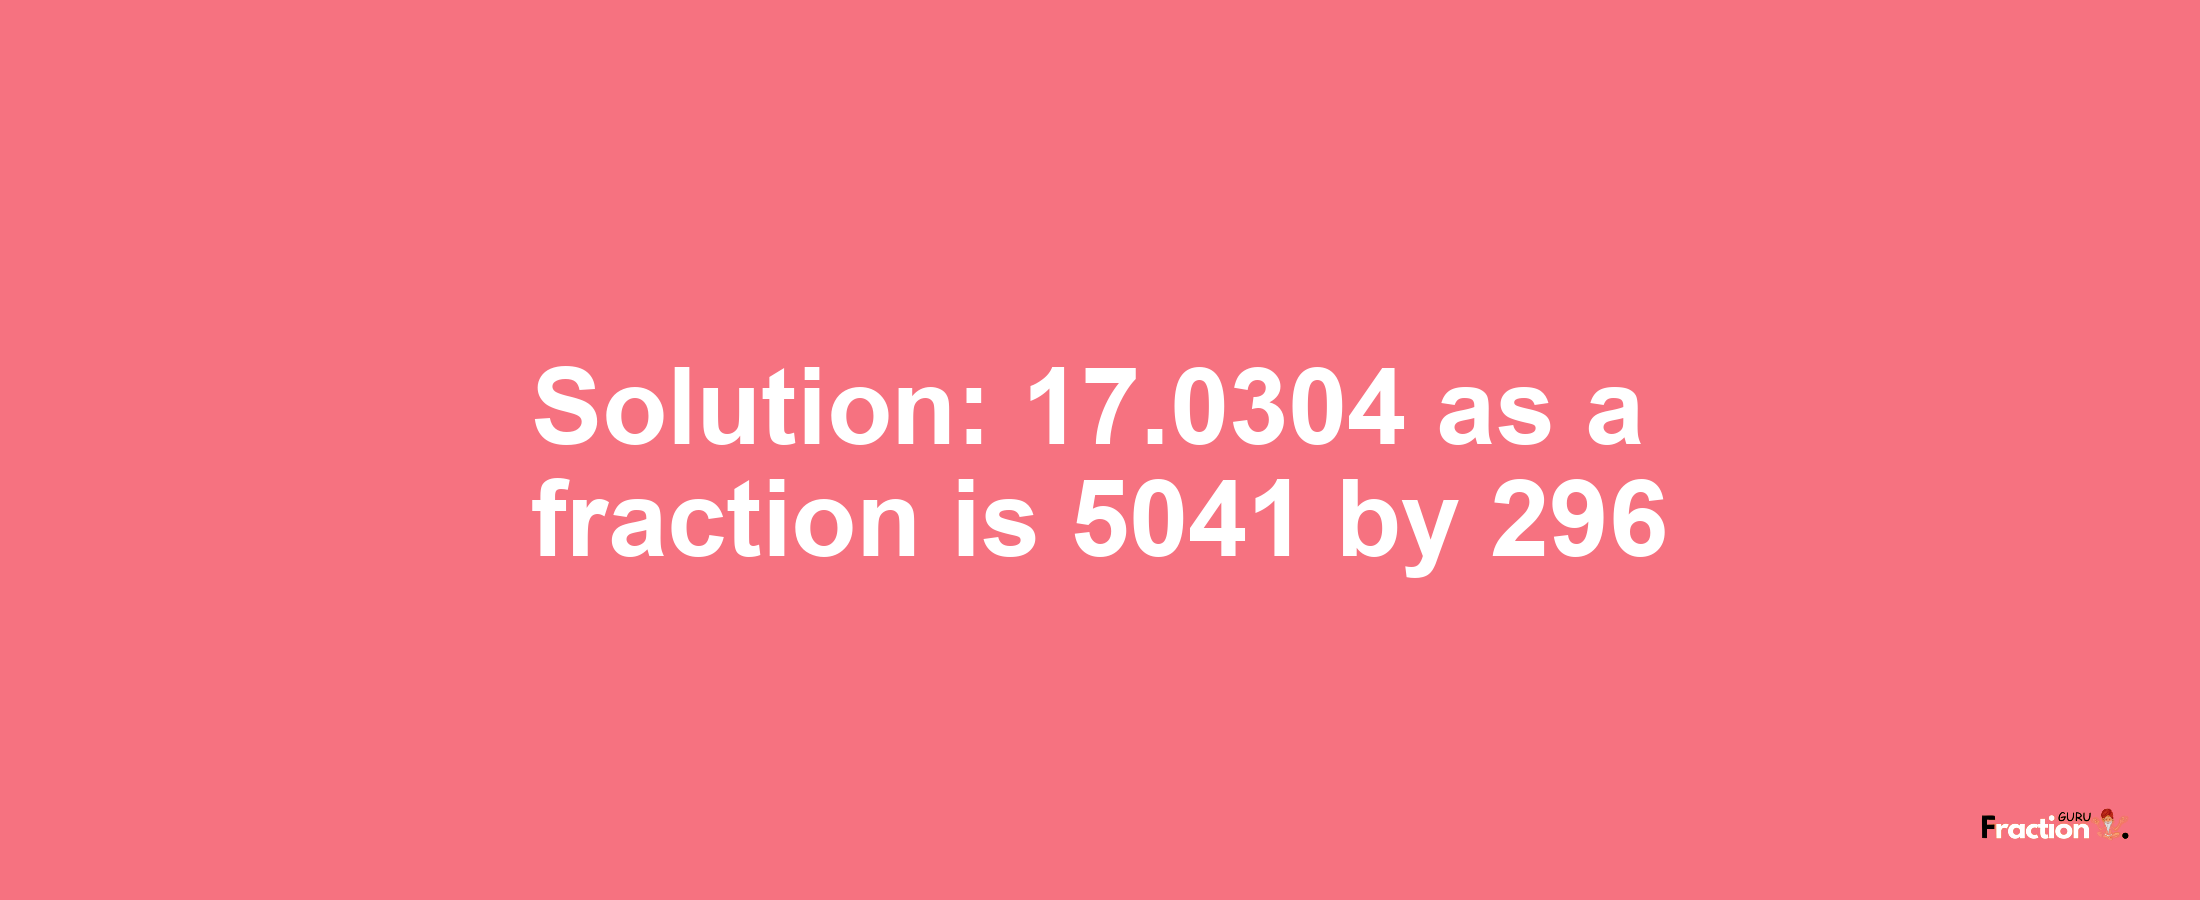 Solution:17.0304 as a fraction is 5041/296